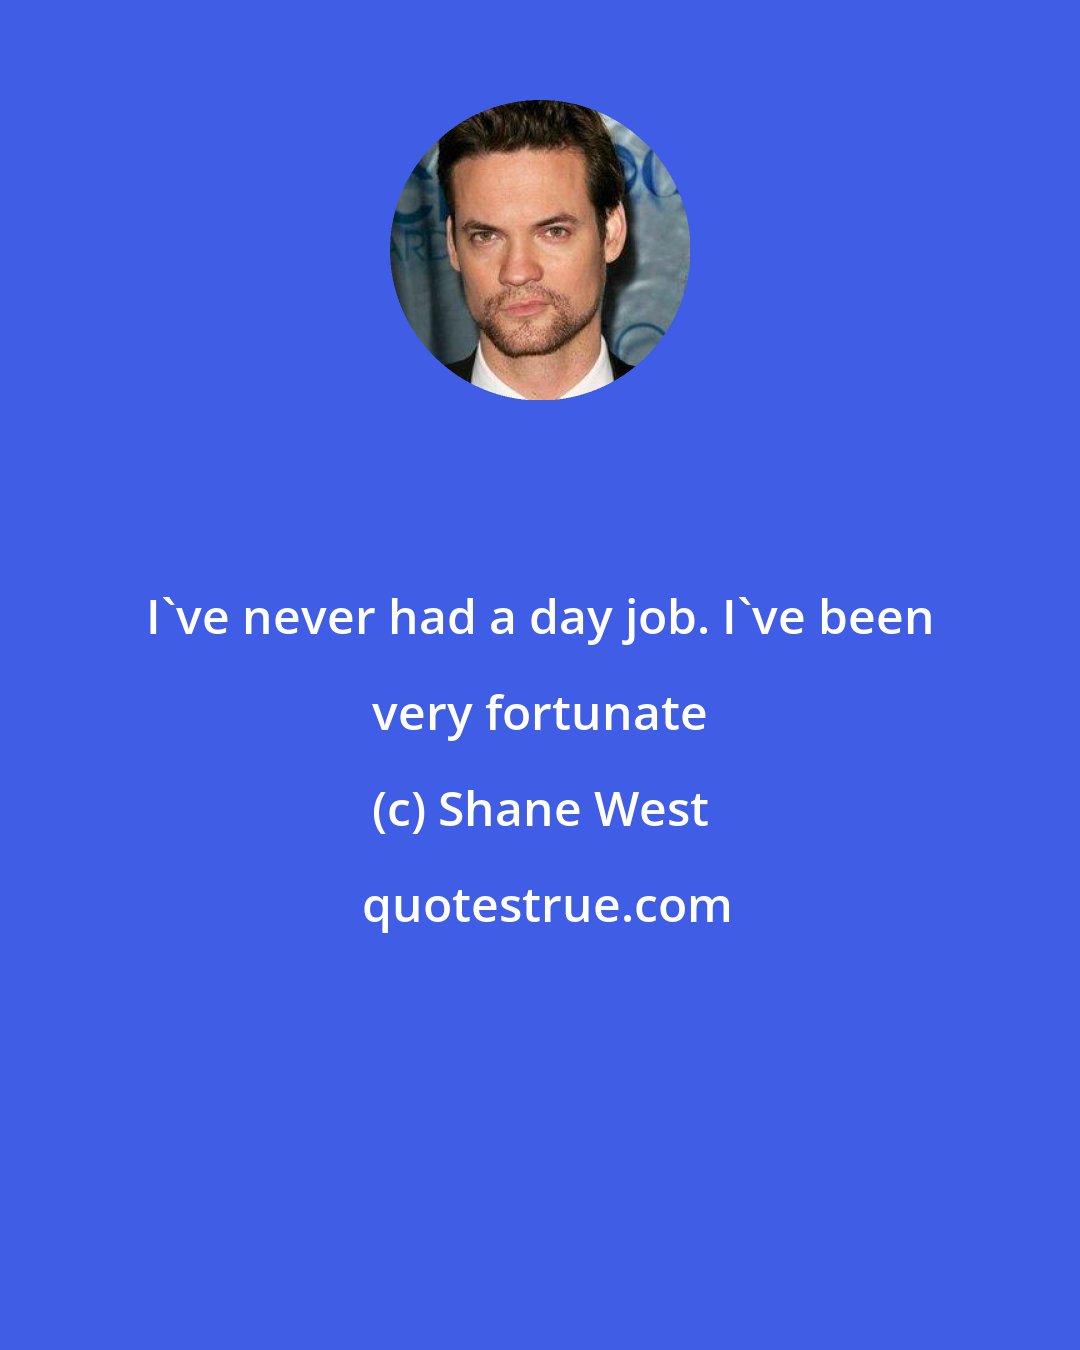 Shane West: I've never had a day job. I've been very fortunate